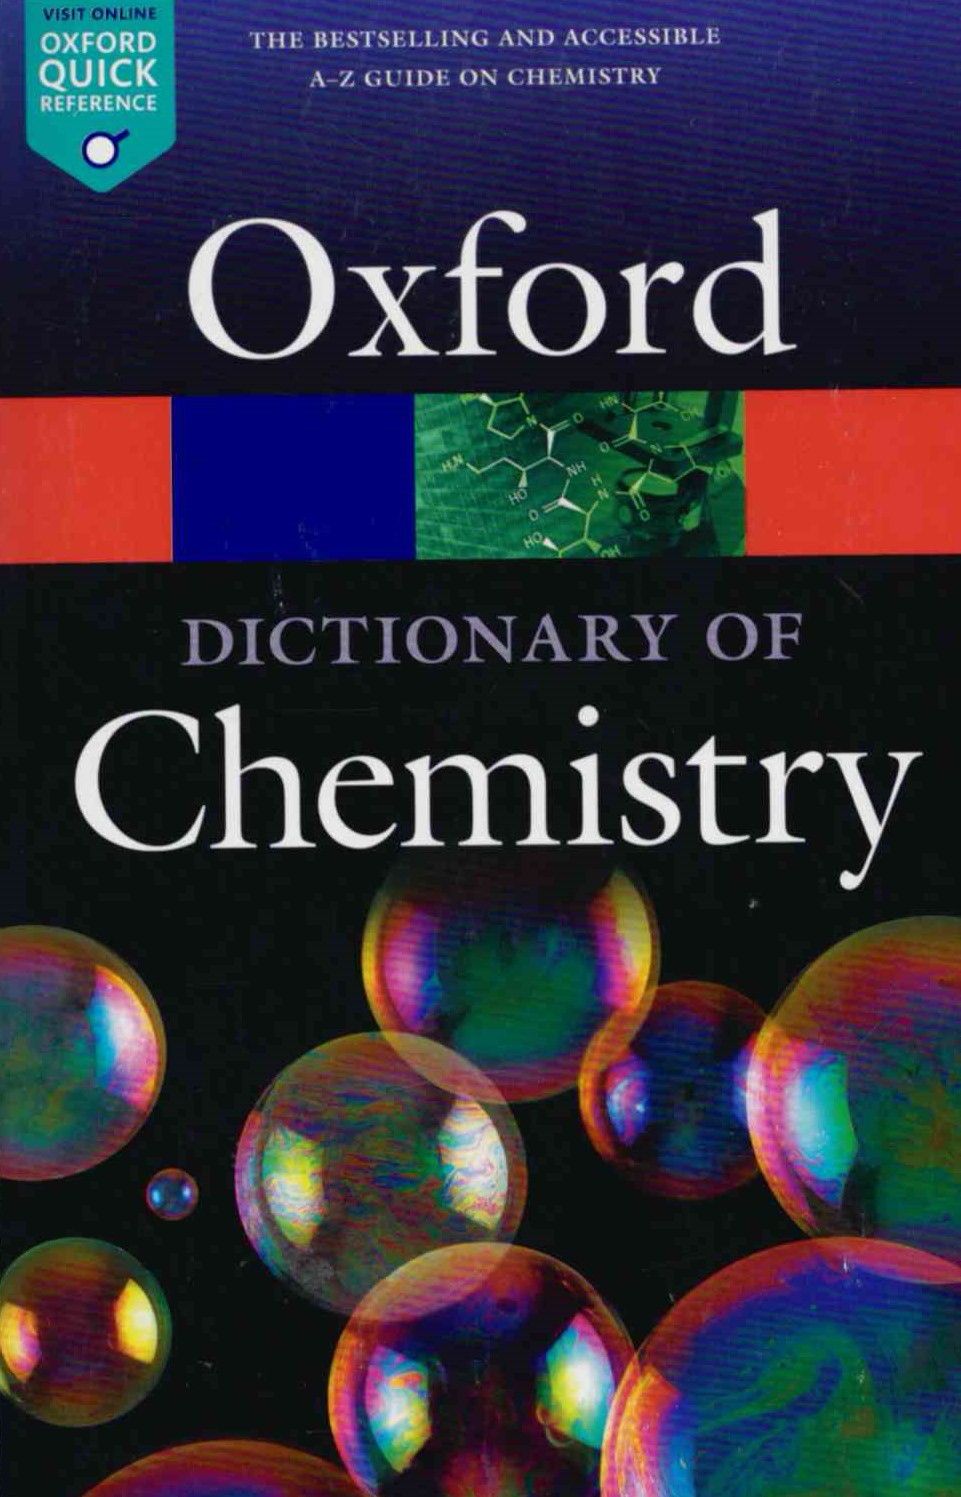 Oxford Dictionary of Chemistry (7th edition)